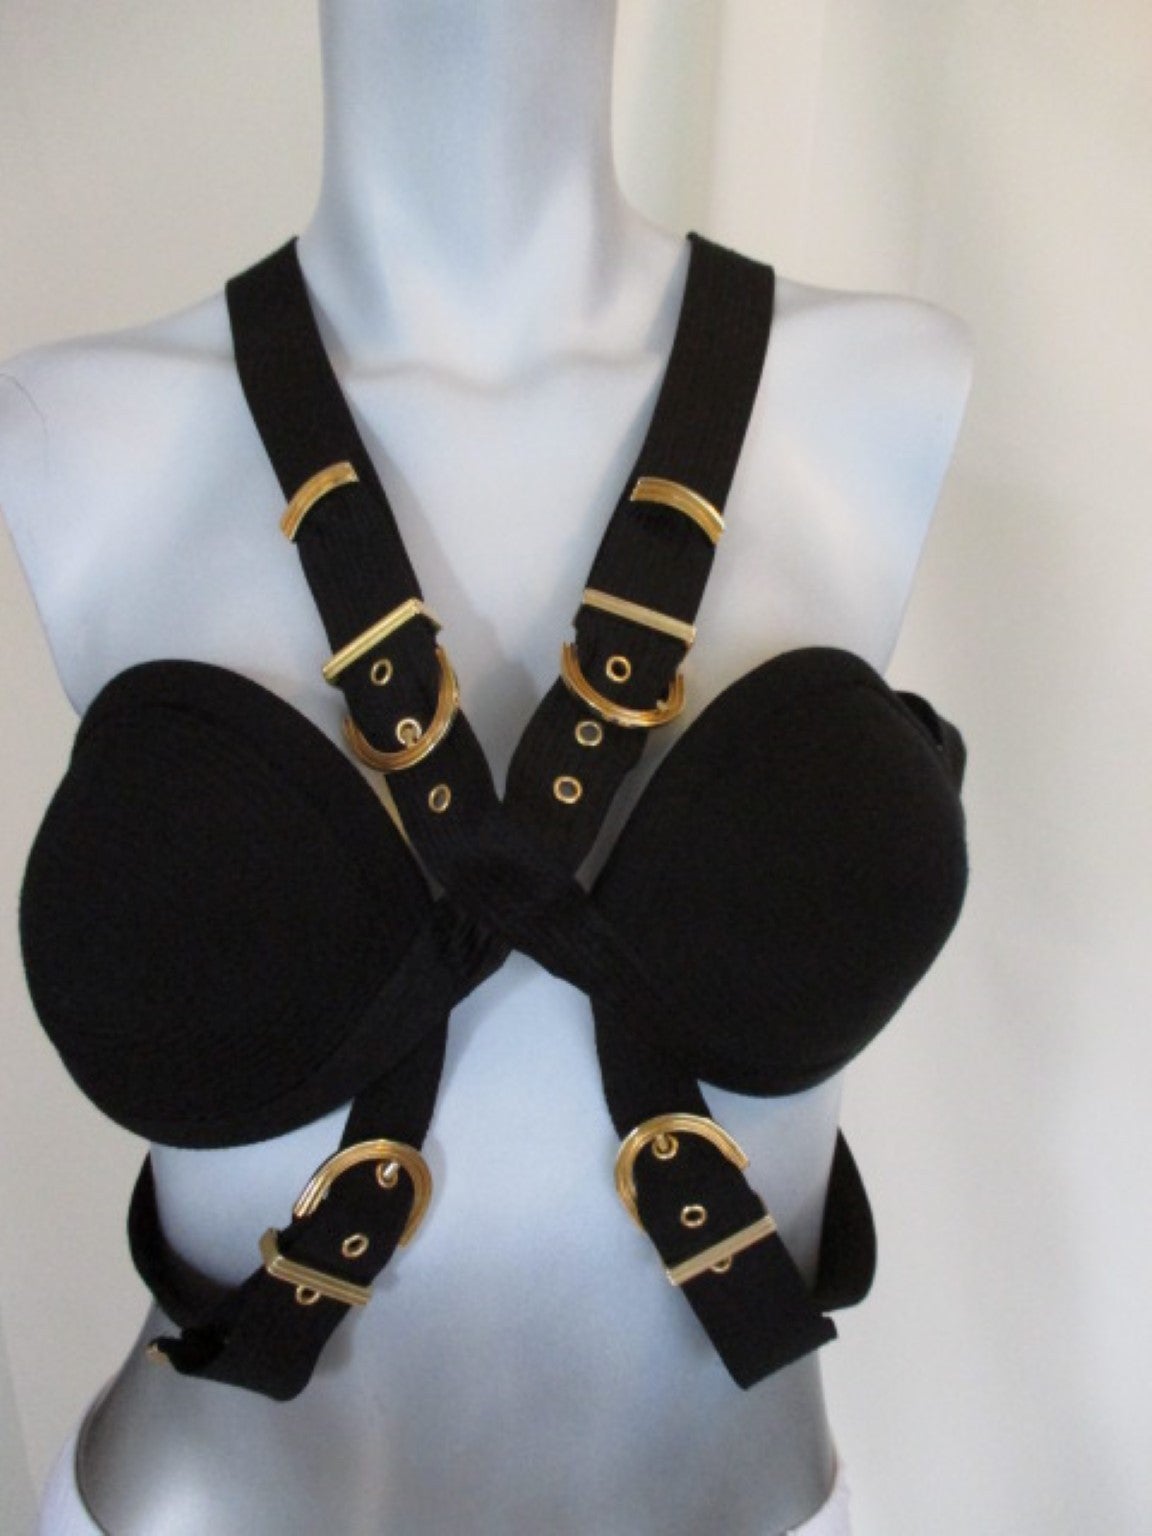 Gianni Versace Couture very rare bondage bustier 1